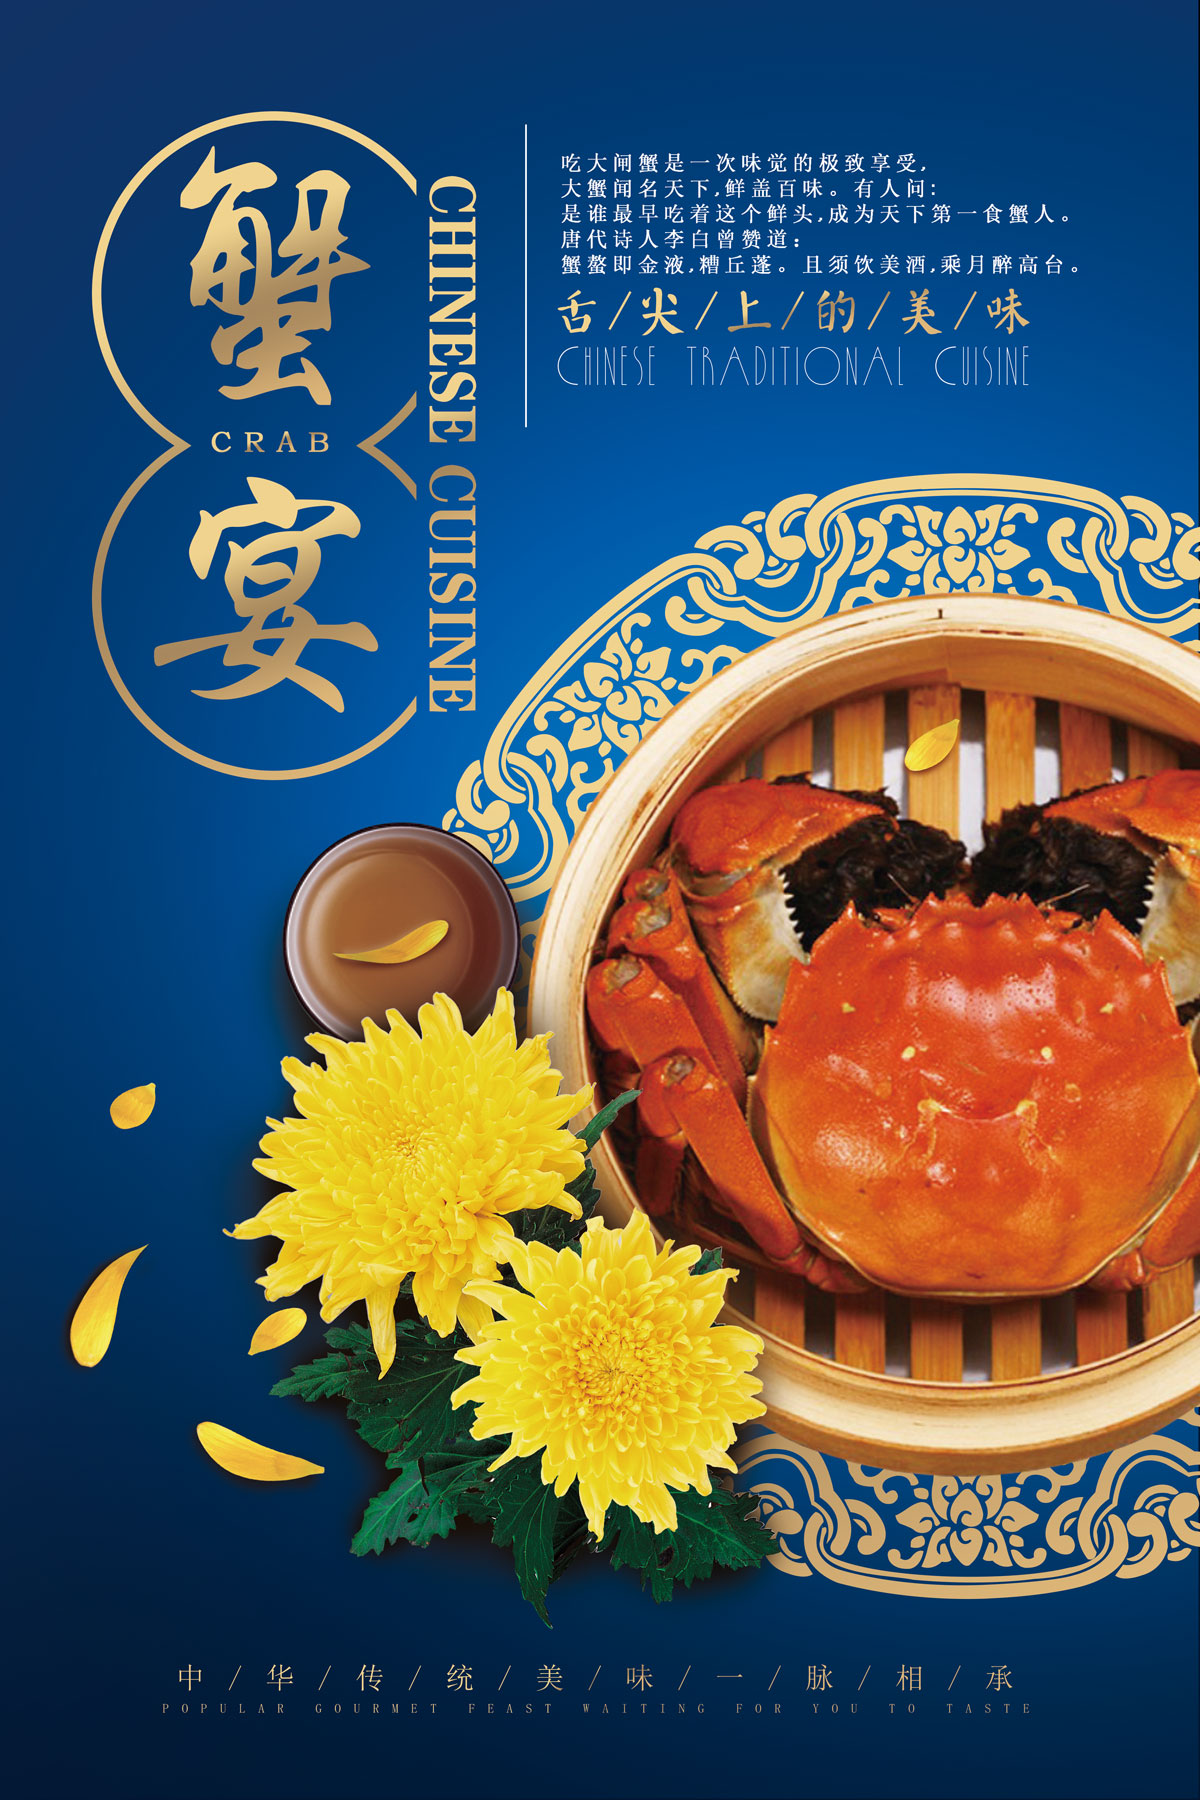 Chinese crabs food posters - restaurant advertising design ...